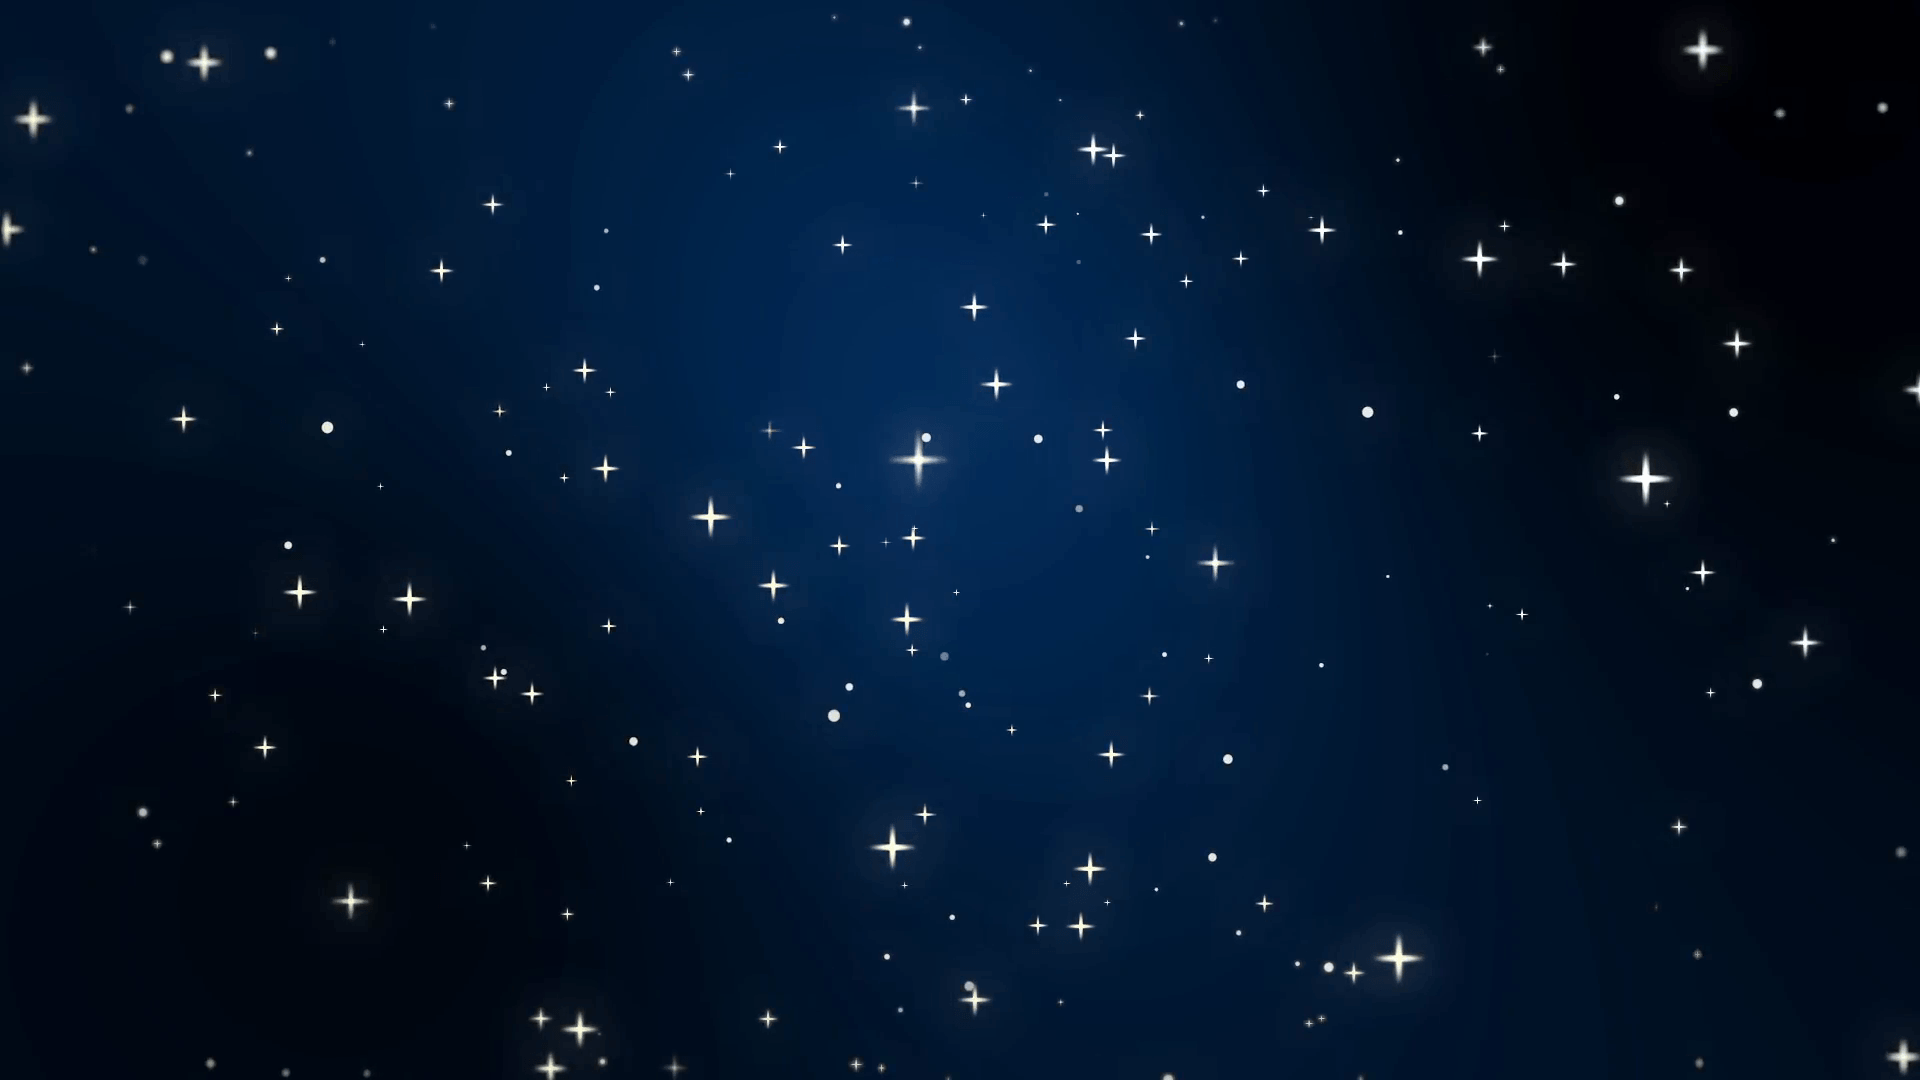 Dark Blue and Black Logo - Night Sky Full Of Stars Animation Made Of Sparkly Light Particles